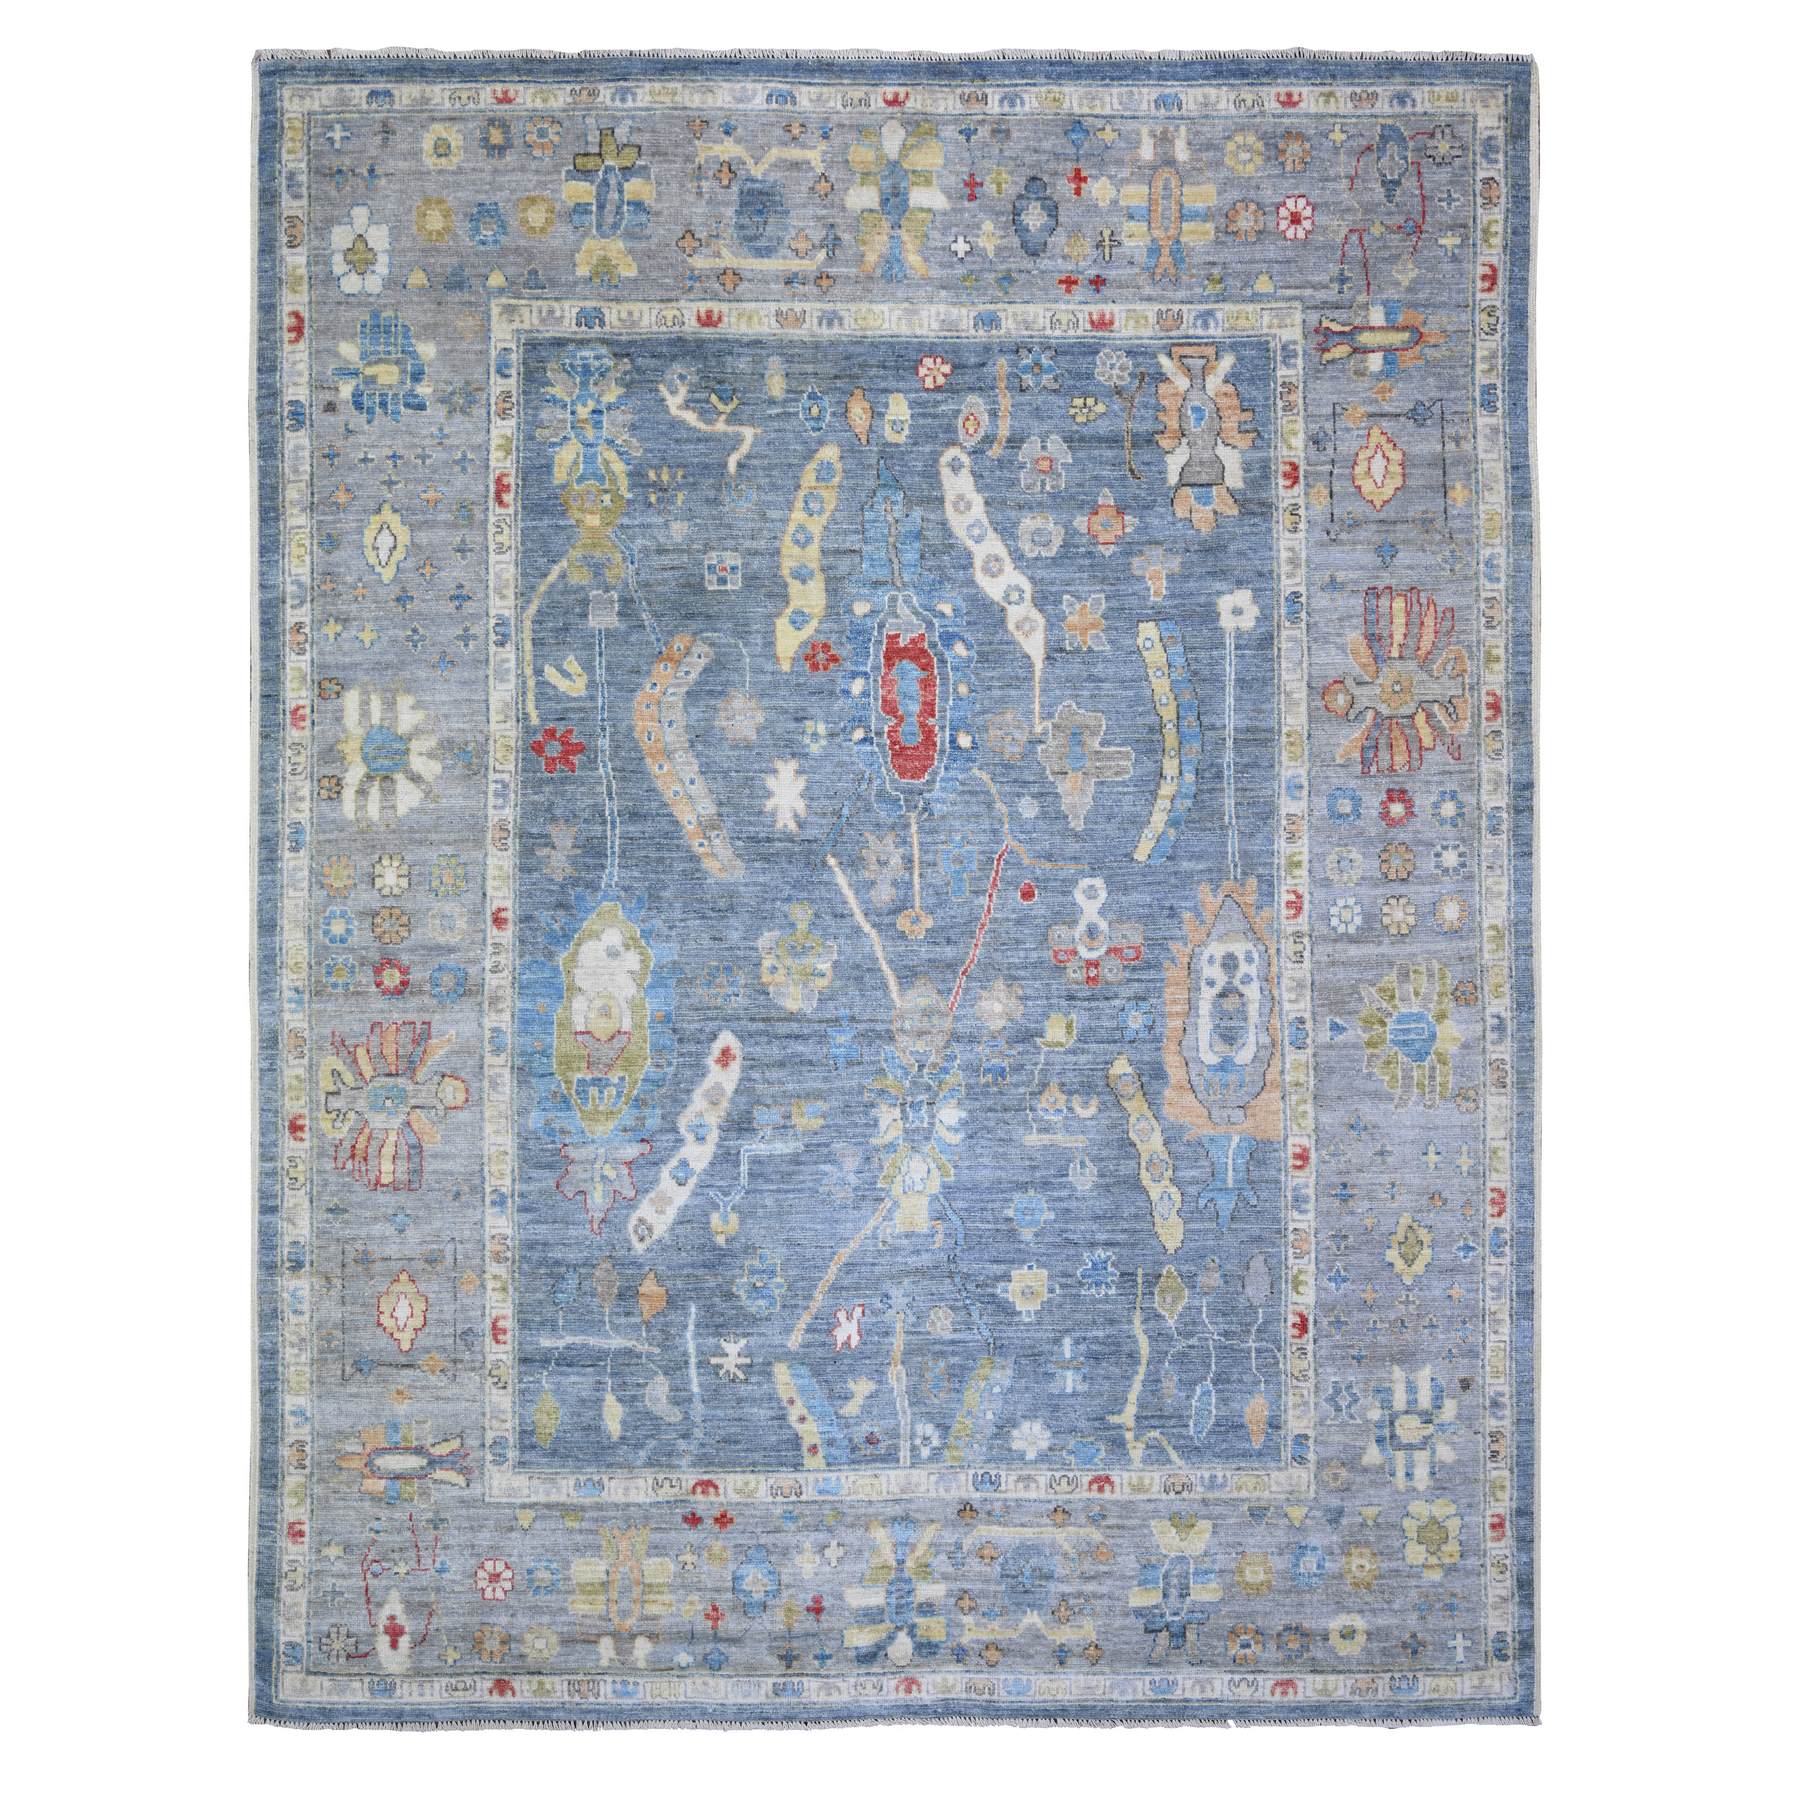 8'x9'6" Steel Blue, Soft Wool Hand Woven, Afghan Angora Oushak with Colorful Motifs Vegetable Dyes, Oriental Rug 